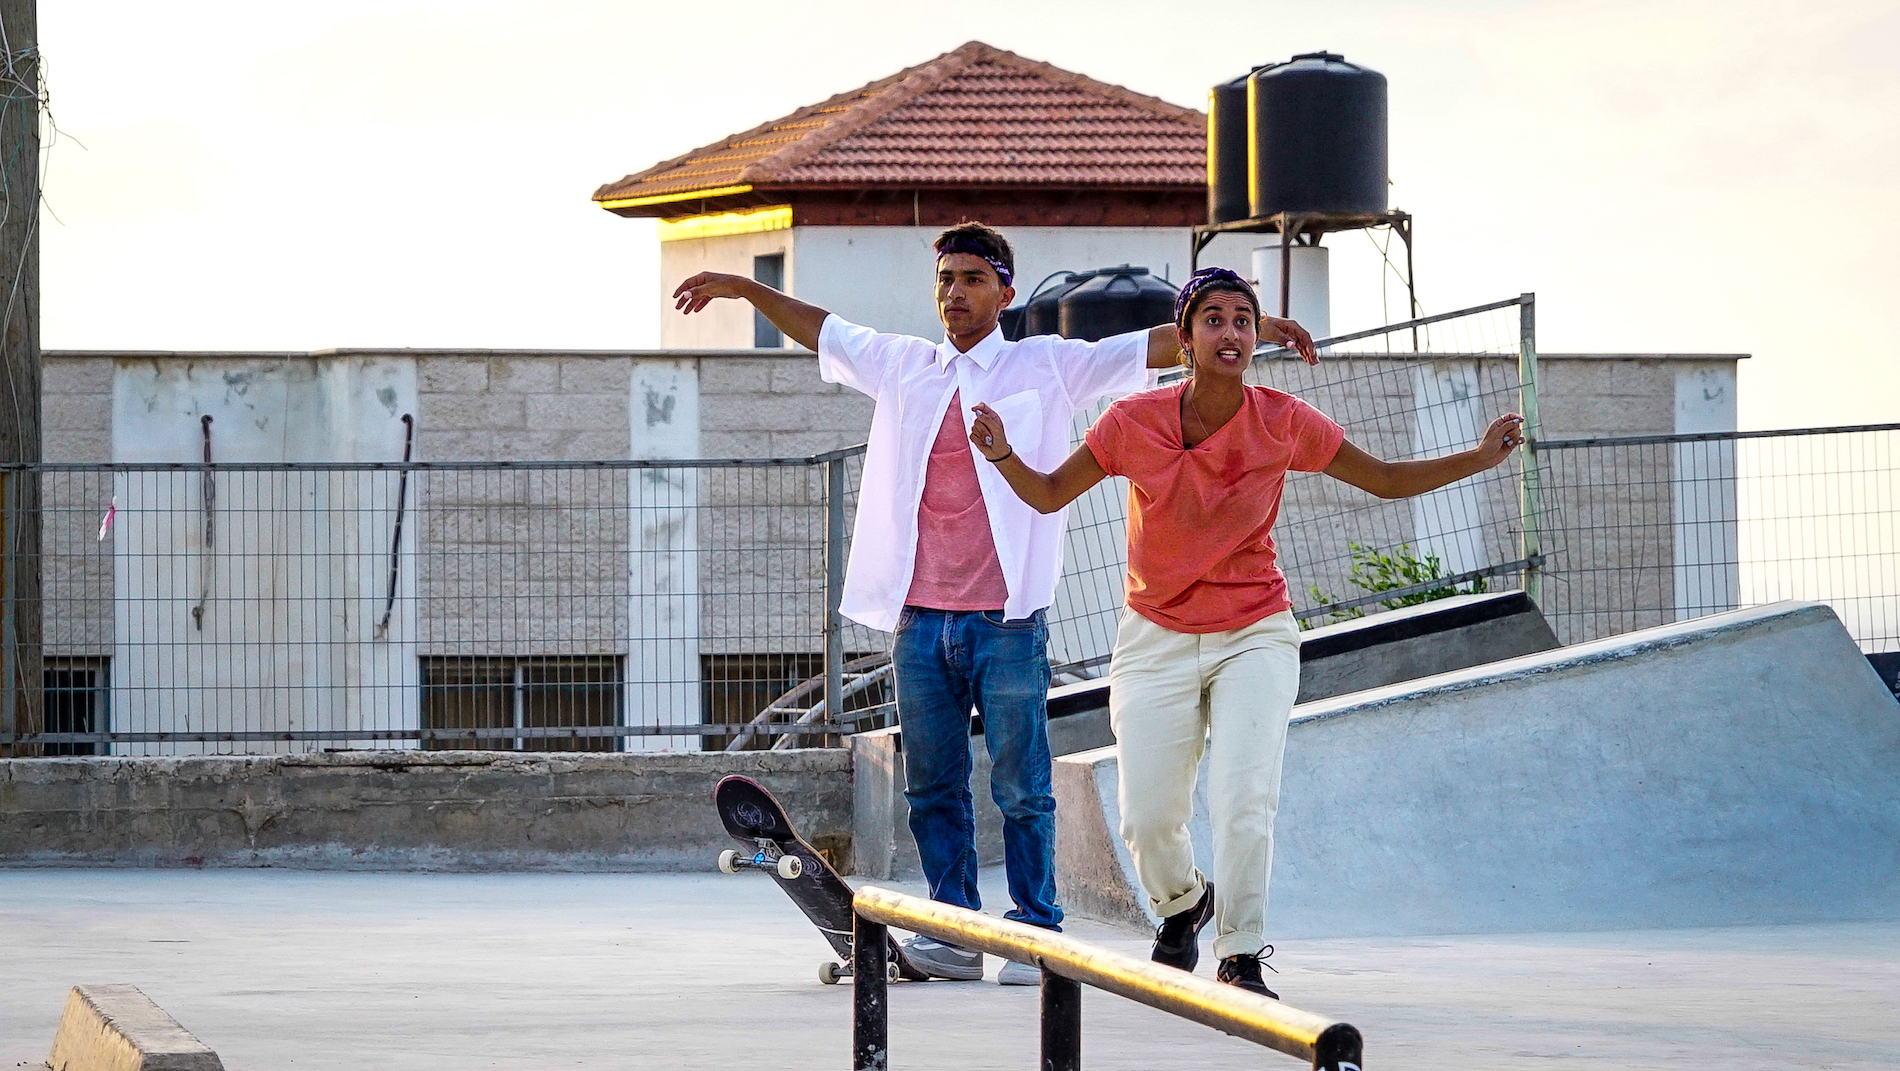 Actors in the skate park for A Skate Play 